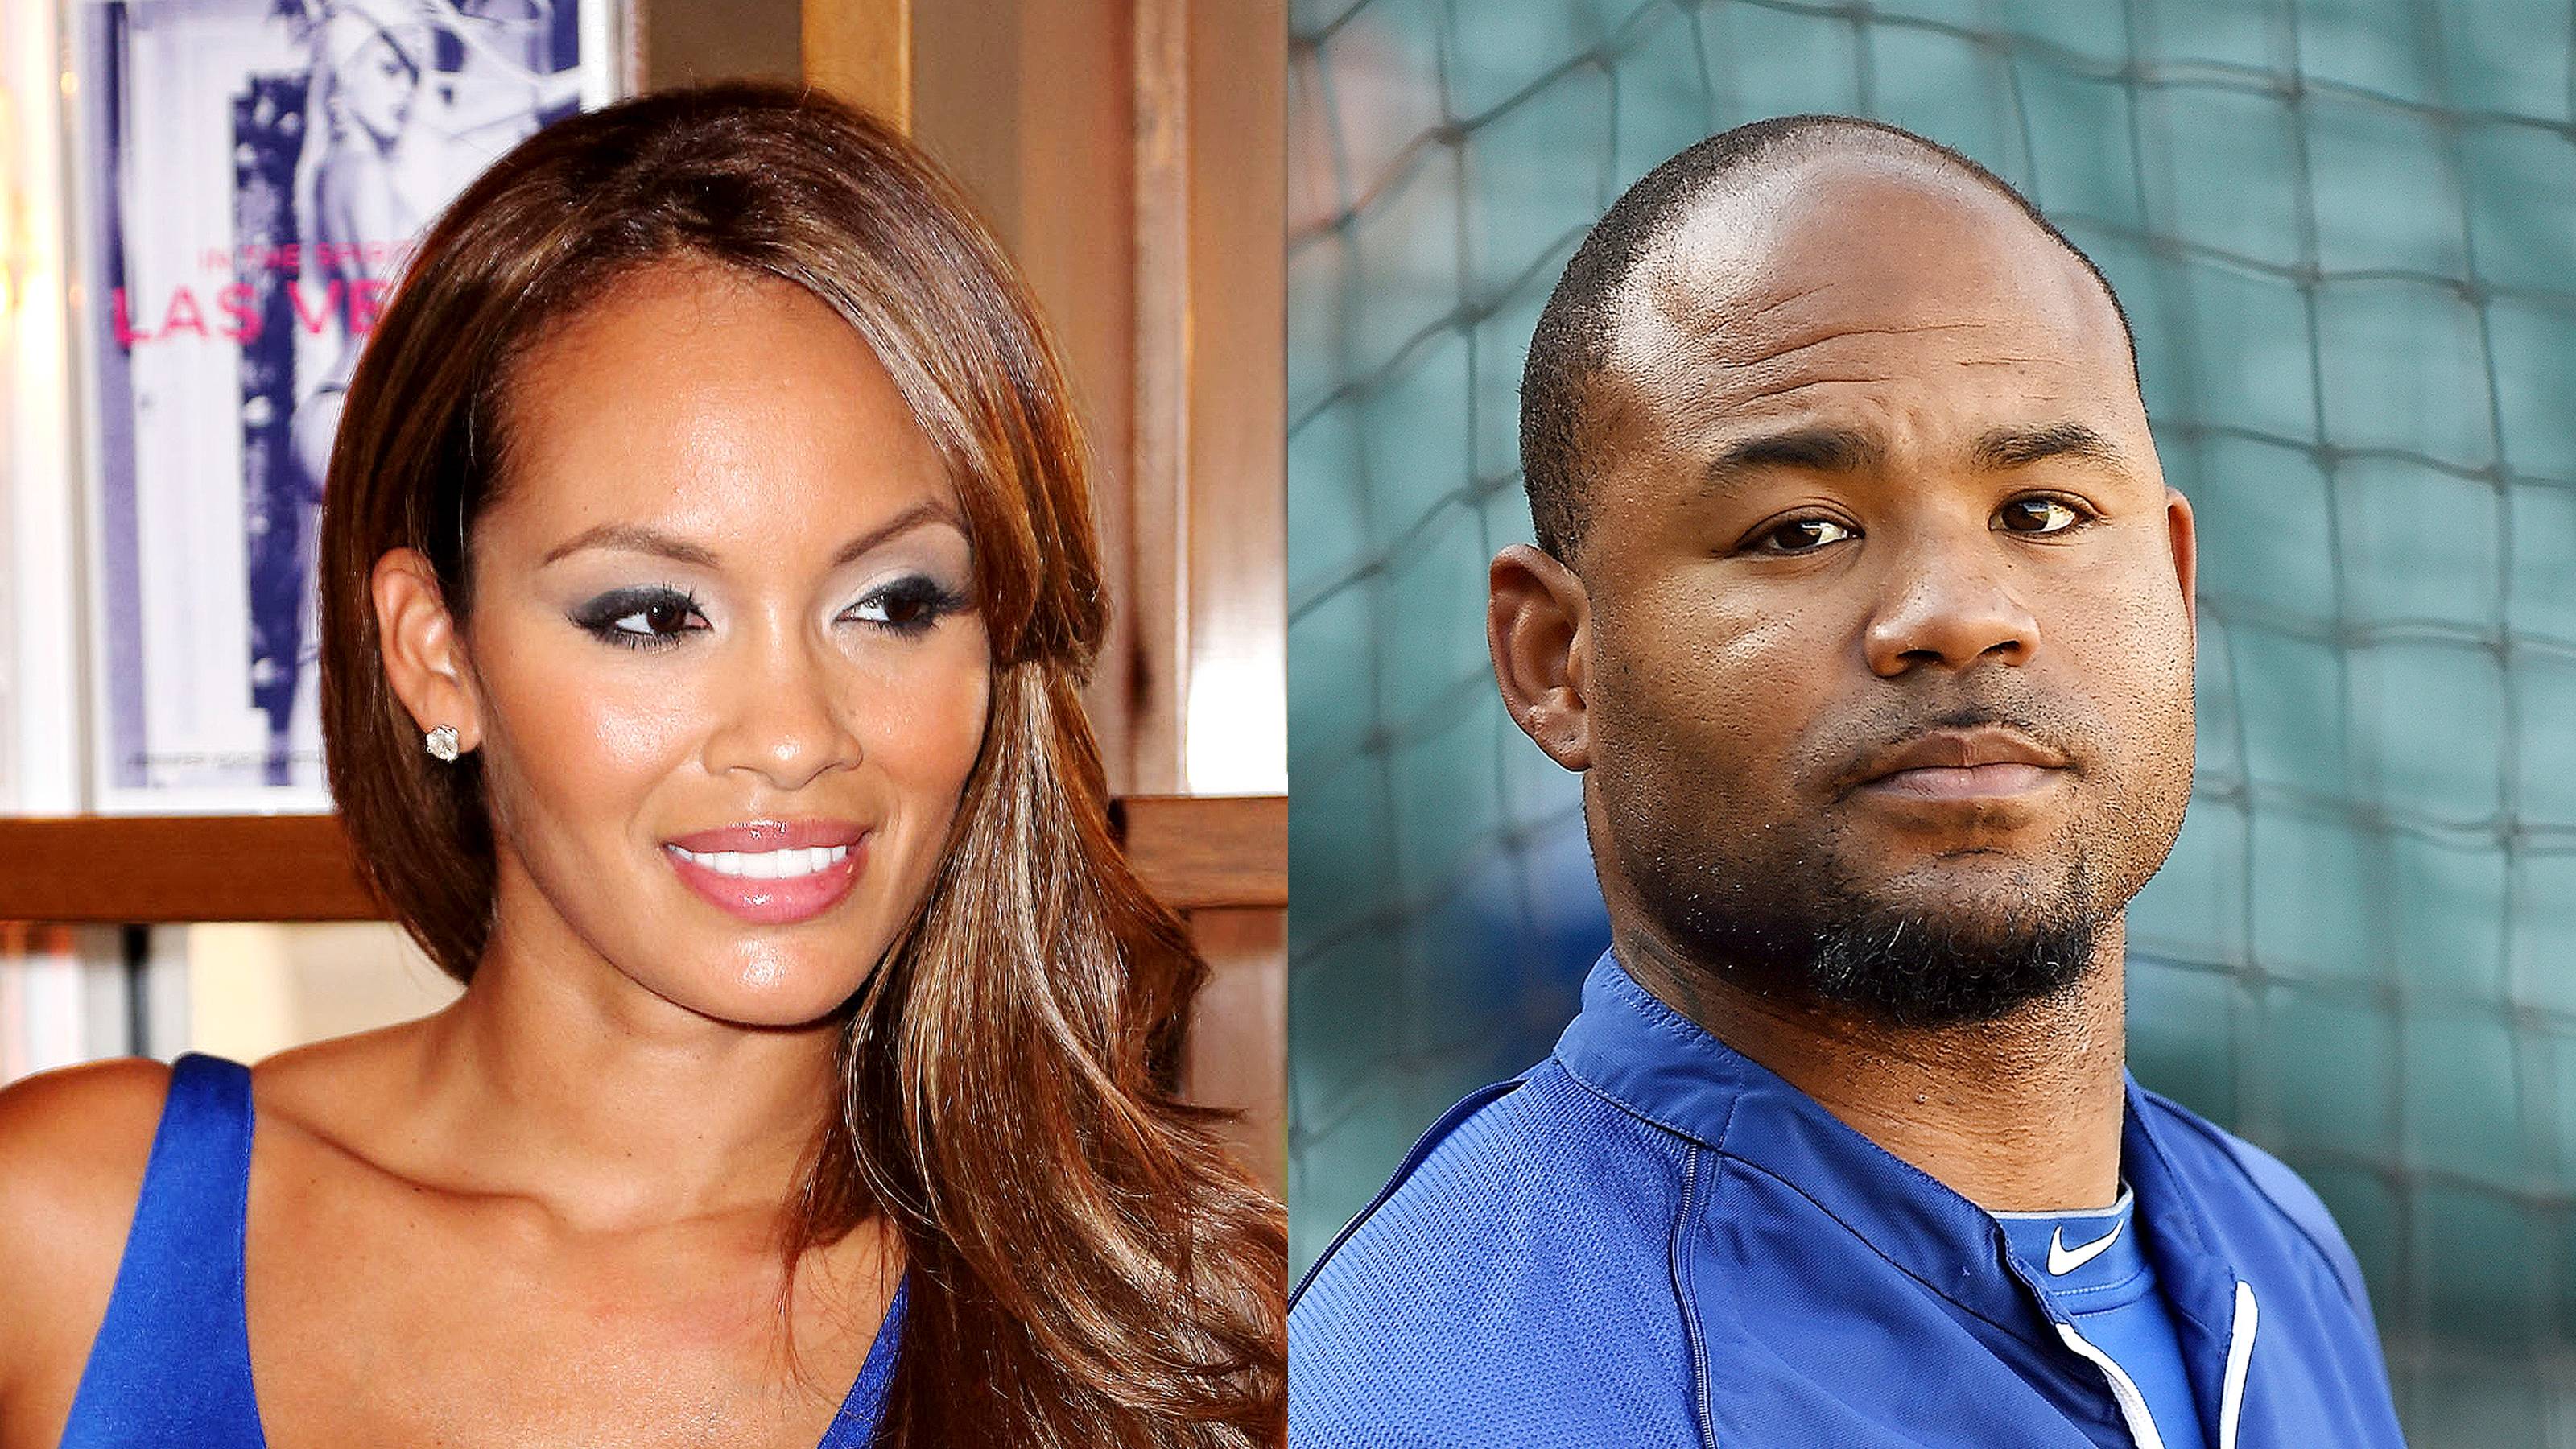 Evelyn Lozada Shares A Picture Of Carl Leo And Carl Crawford